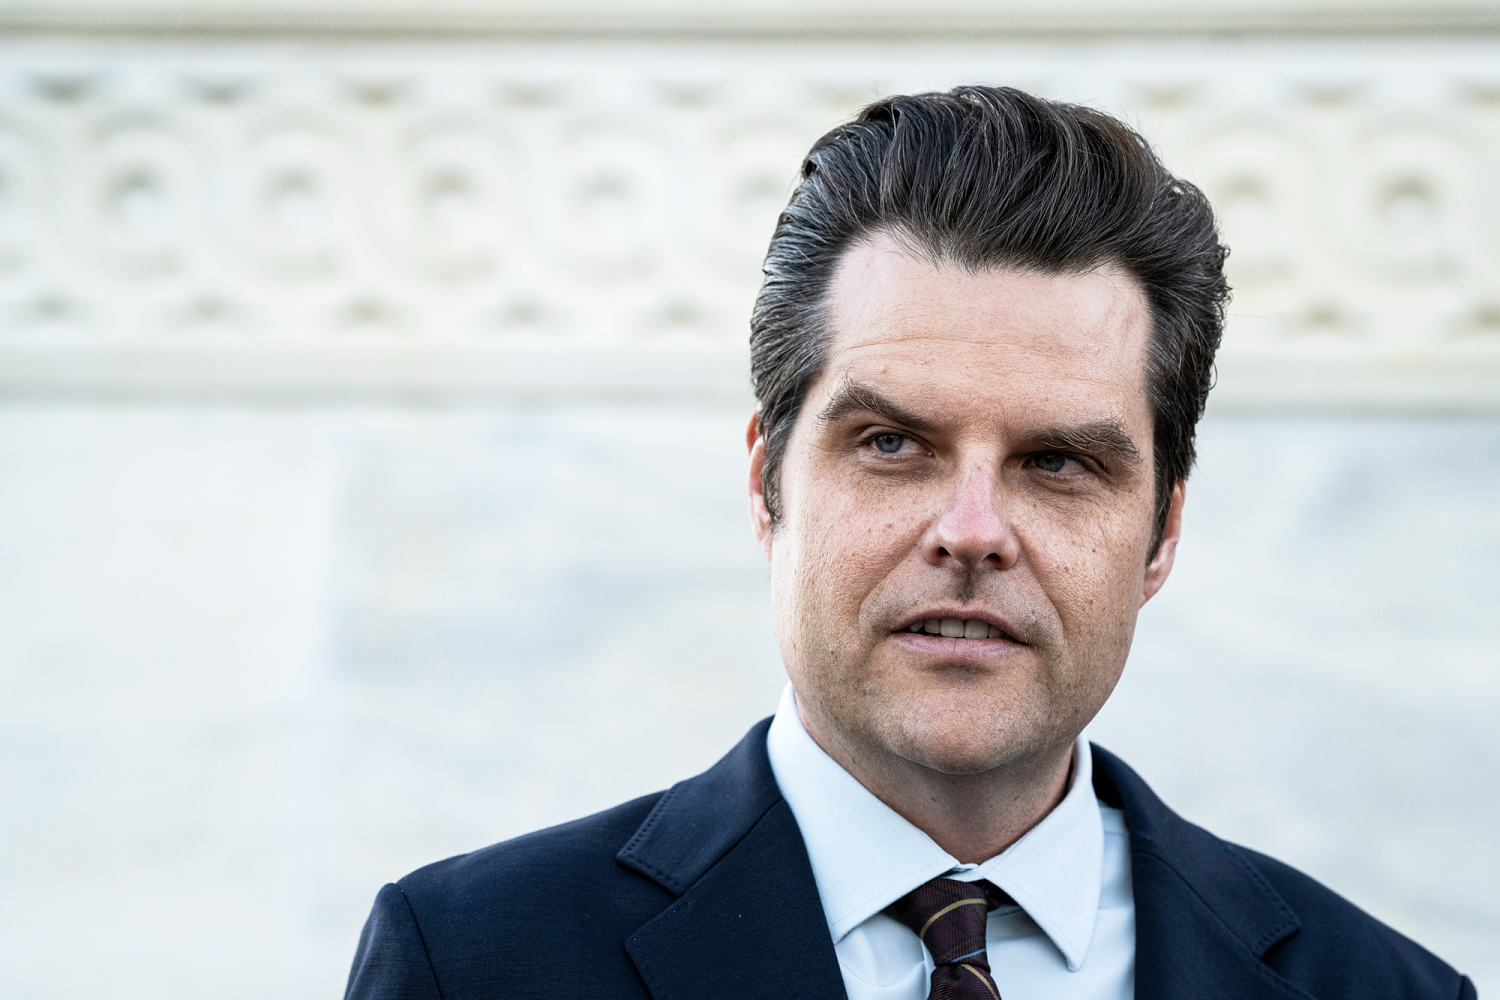 New campaign ad ties Matt Gaetz to a convicted sex offender